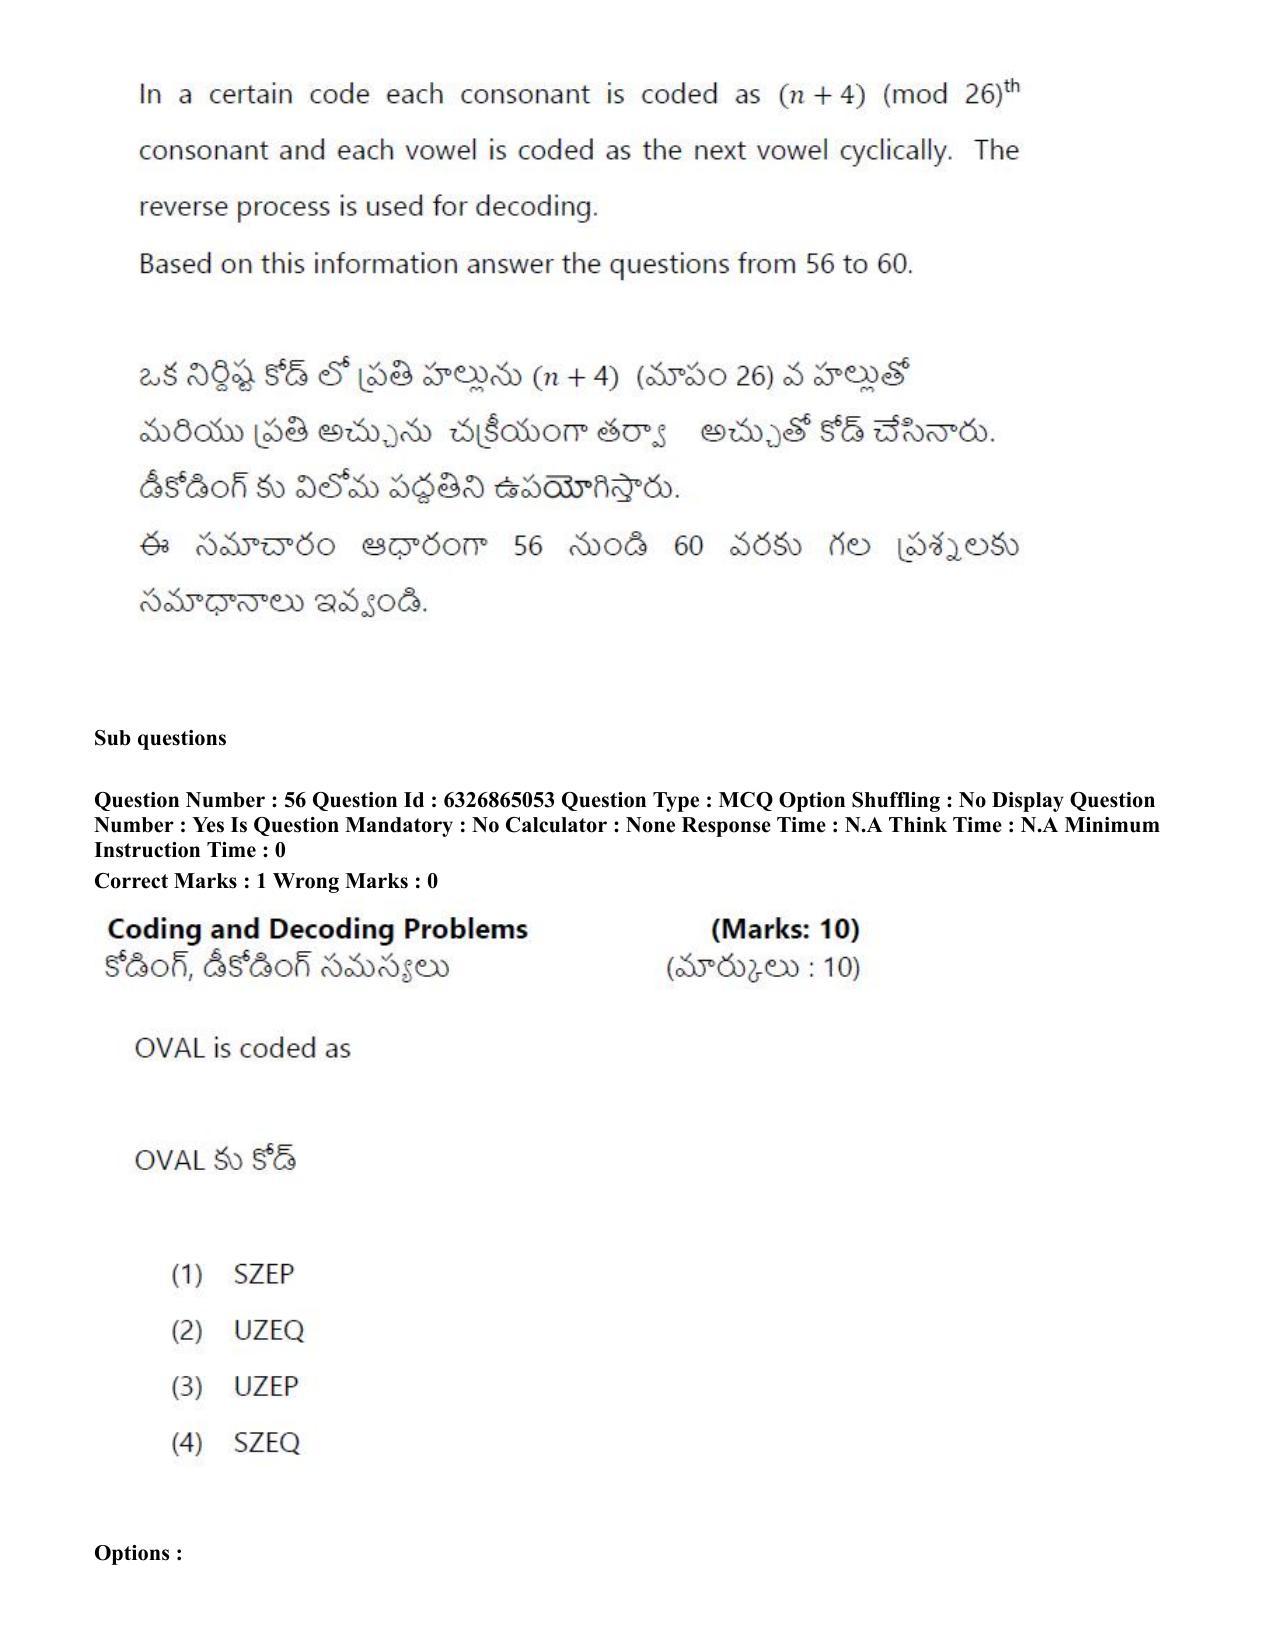 TS ICET 2022 Question Paper 2 - Jul 28, 2022	 - Page 53